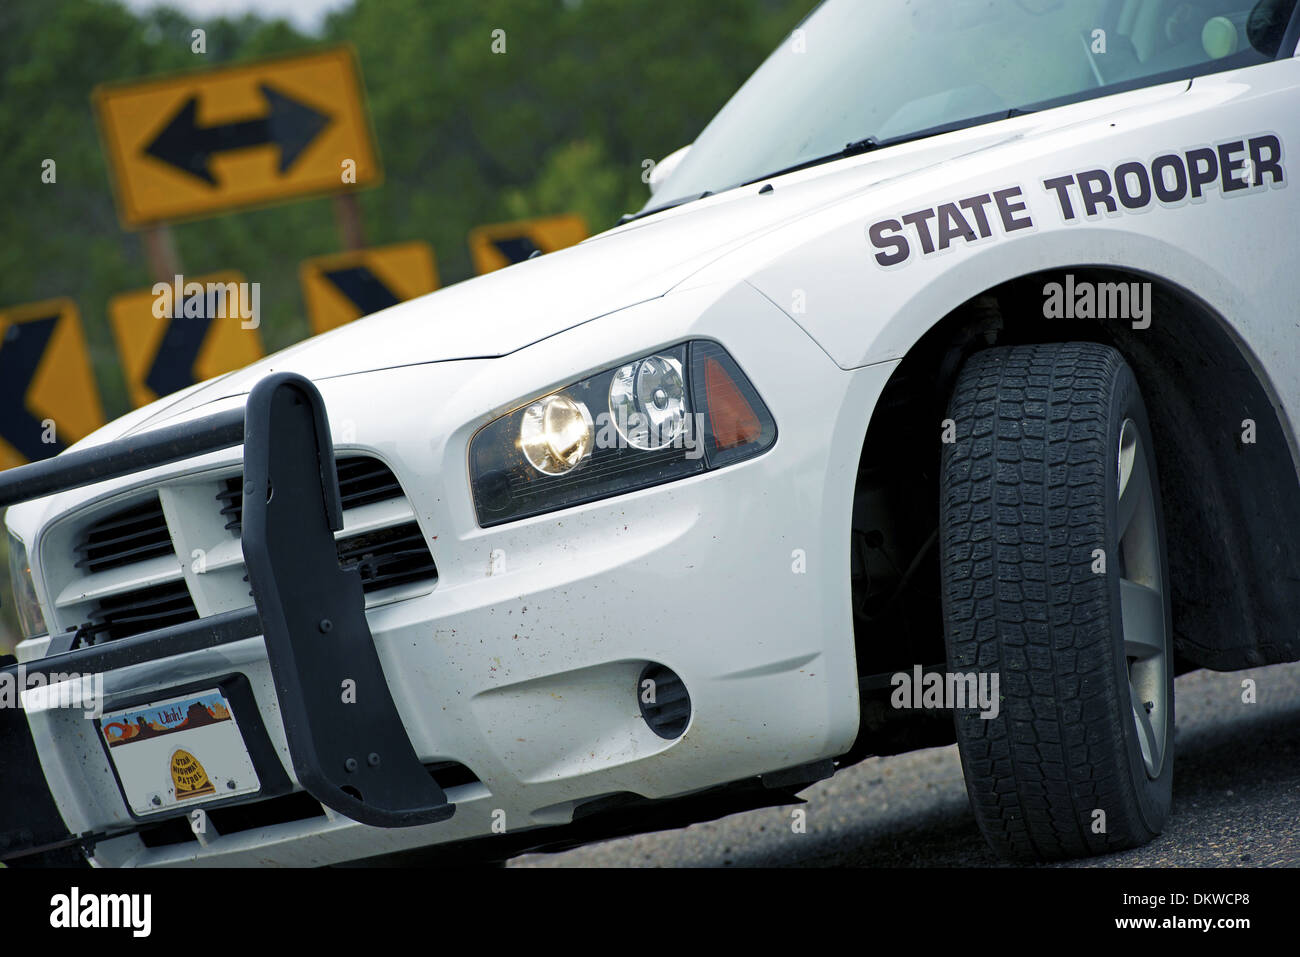 Police Cruiser State Trooper on a Highway. United States of America Police. Stock Photo